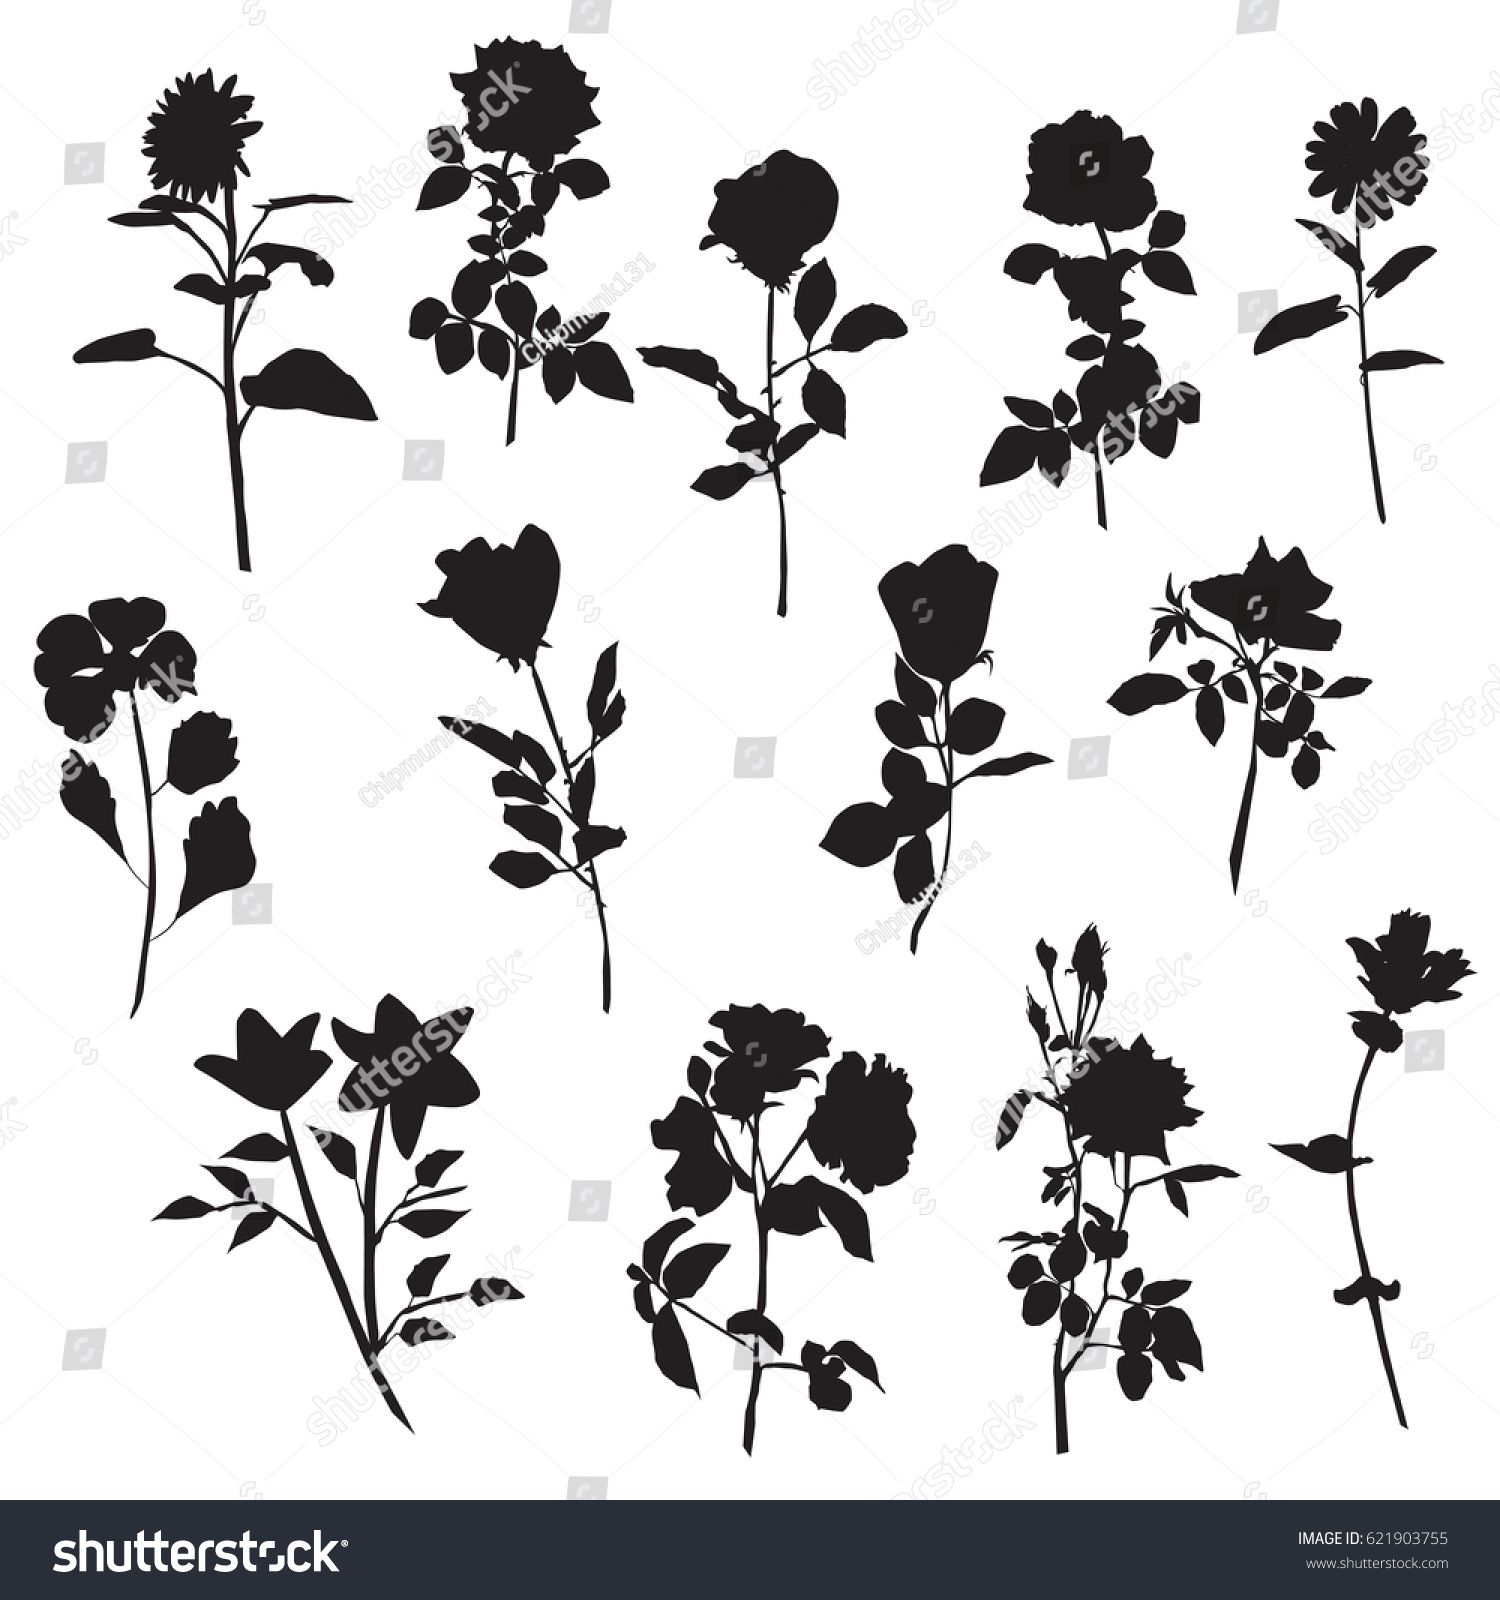 Vector Silhouettes Different Kinds Flowers Rose Stock Photo (Photo ...